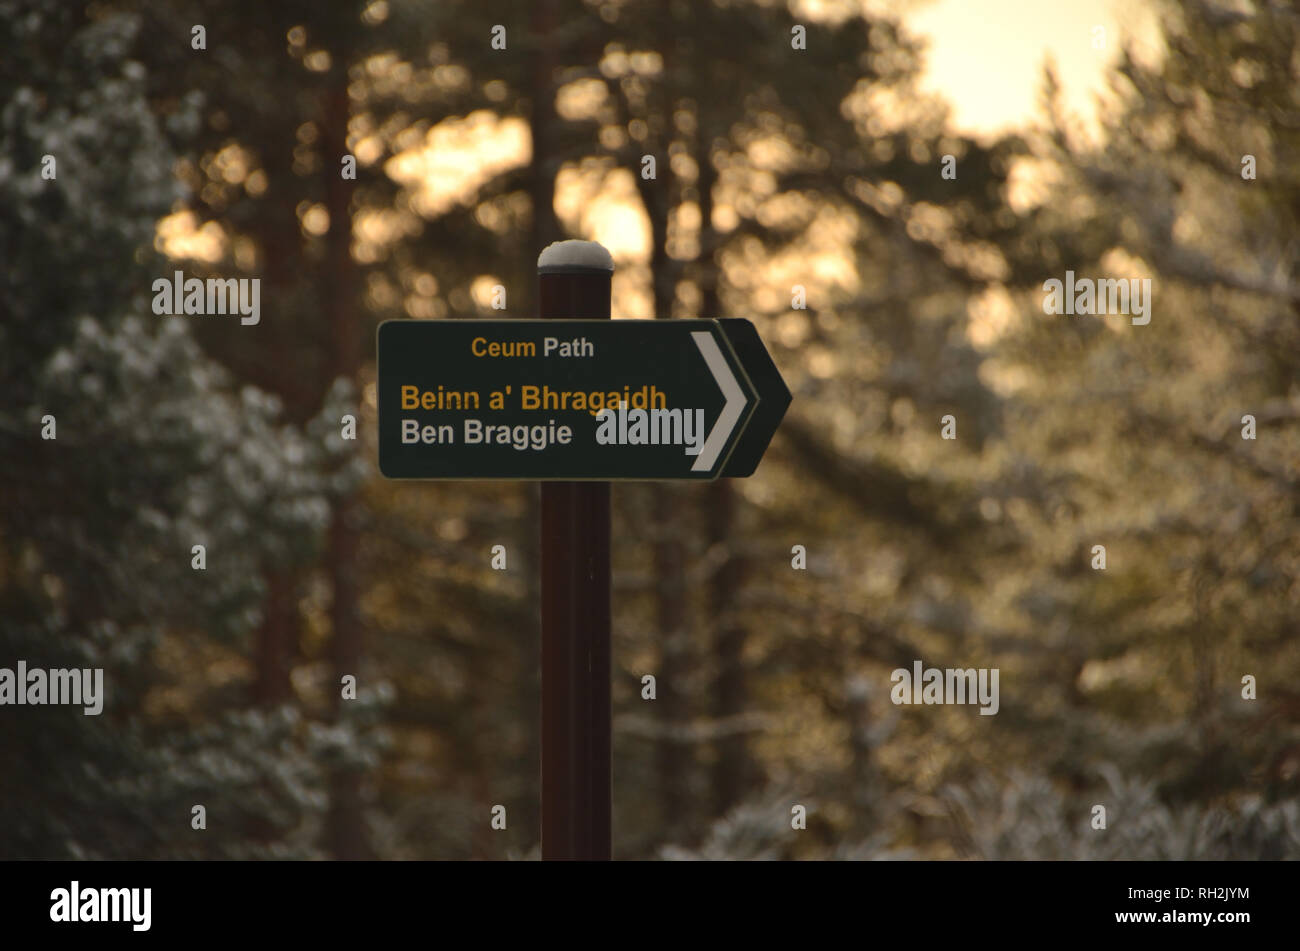 A Gaelic-English bi-lingual footpath direction sign in winter woodland in the Scottish Highlands, Great Britain. Stock Photo